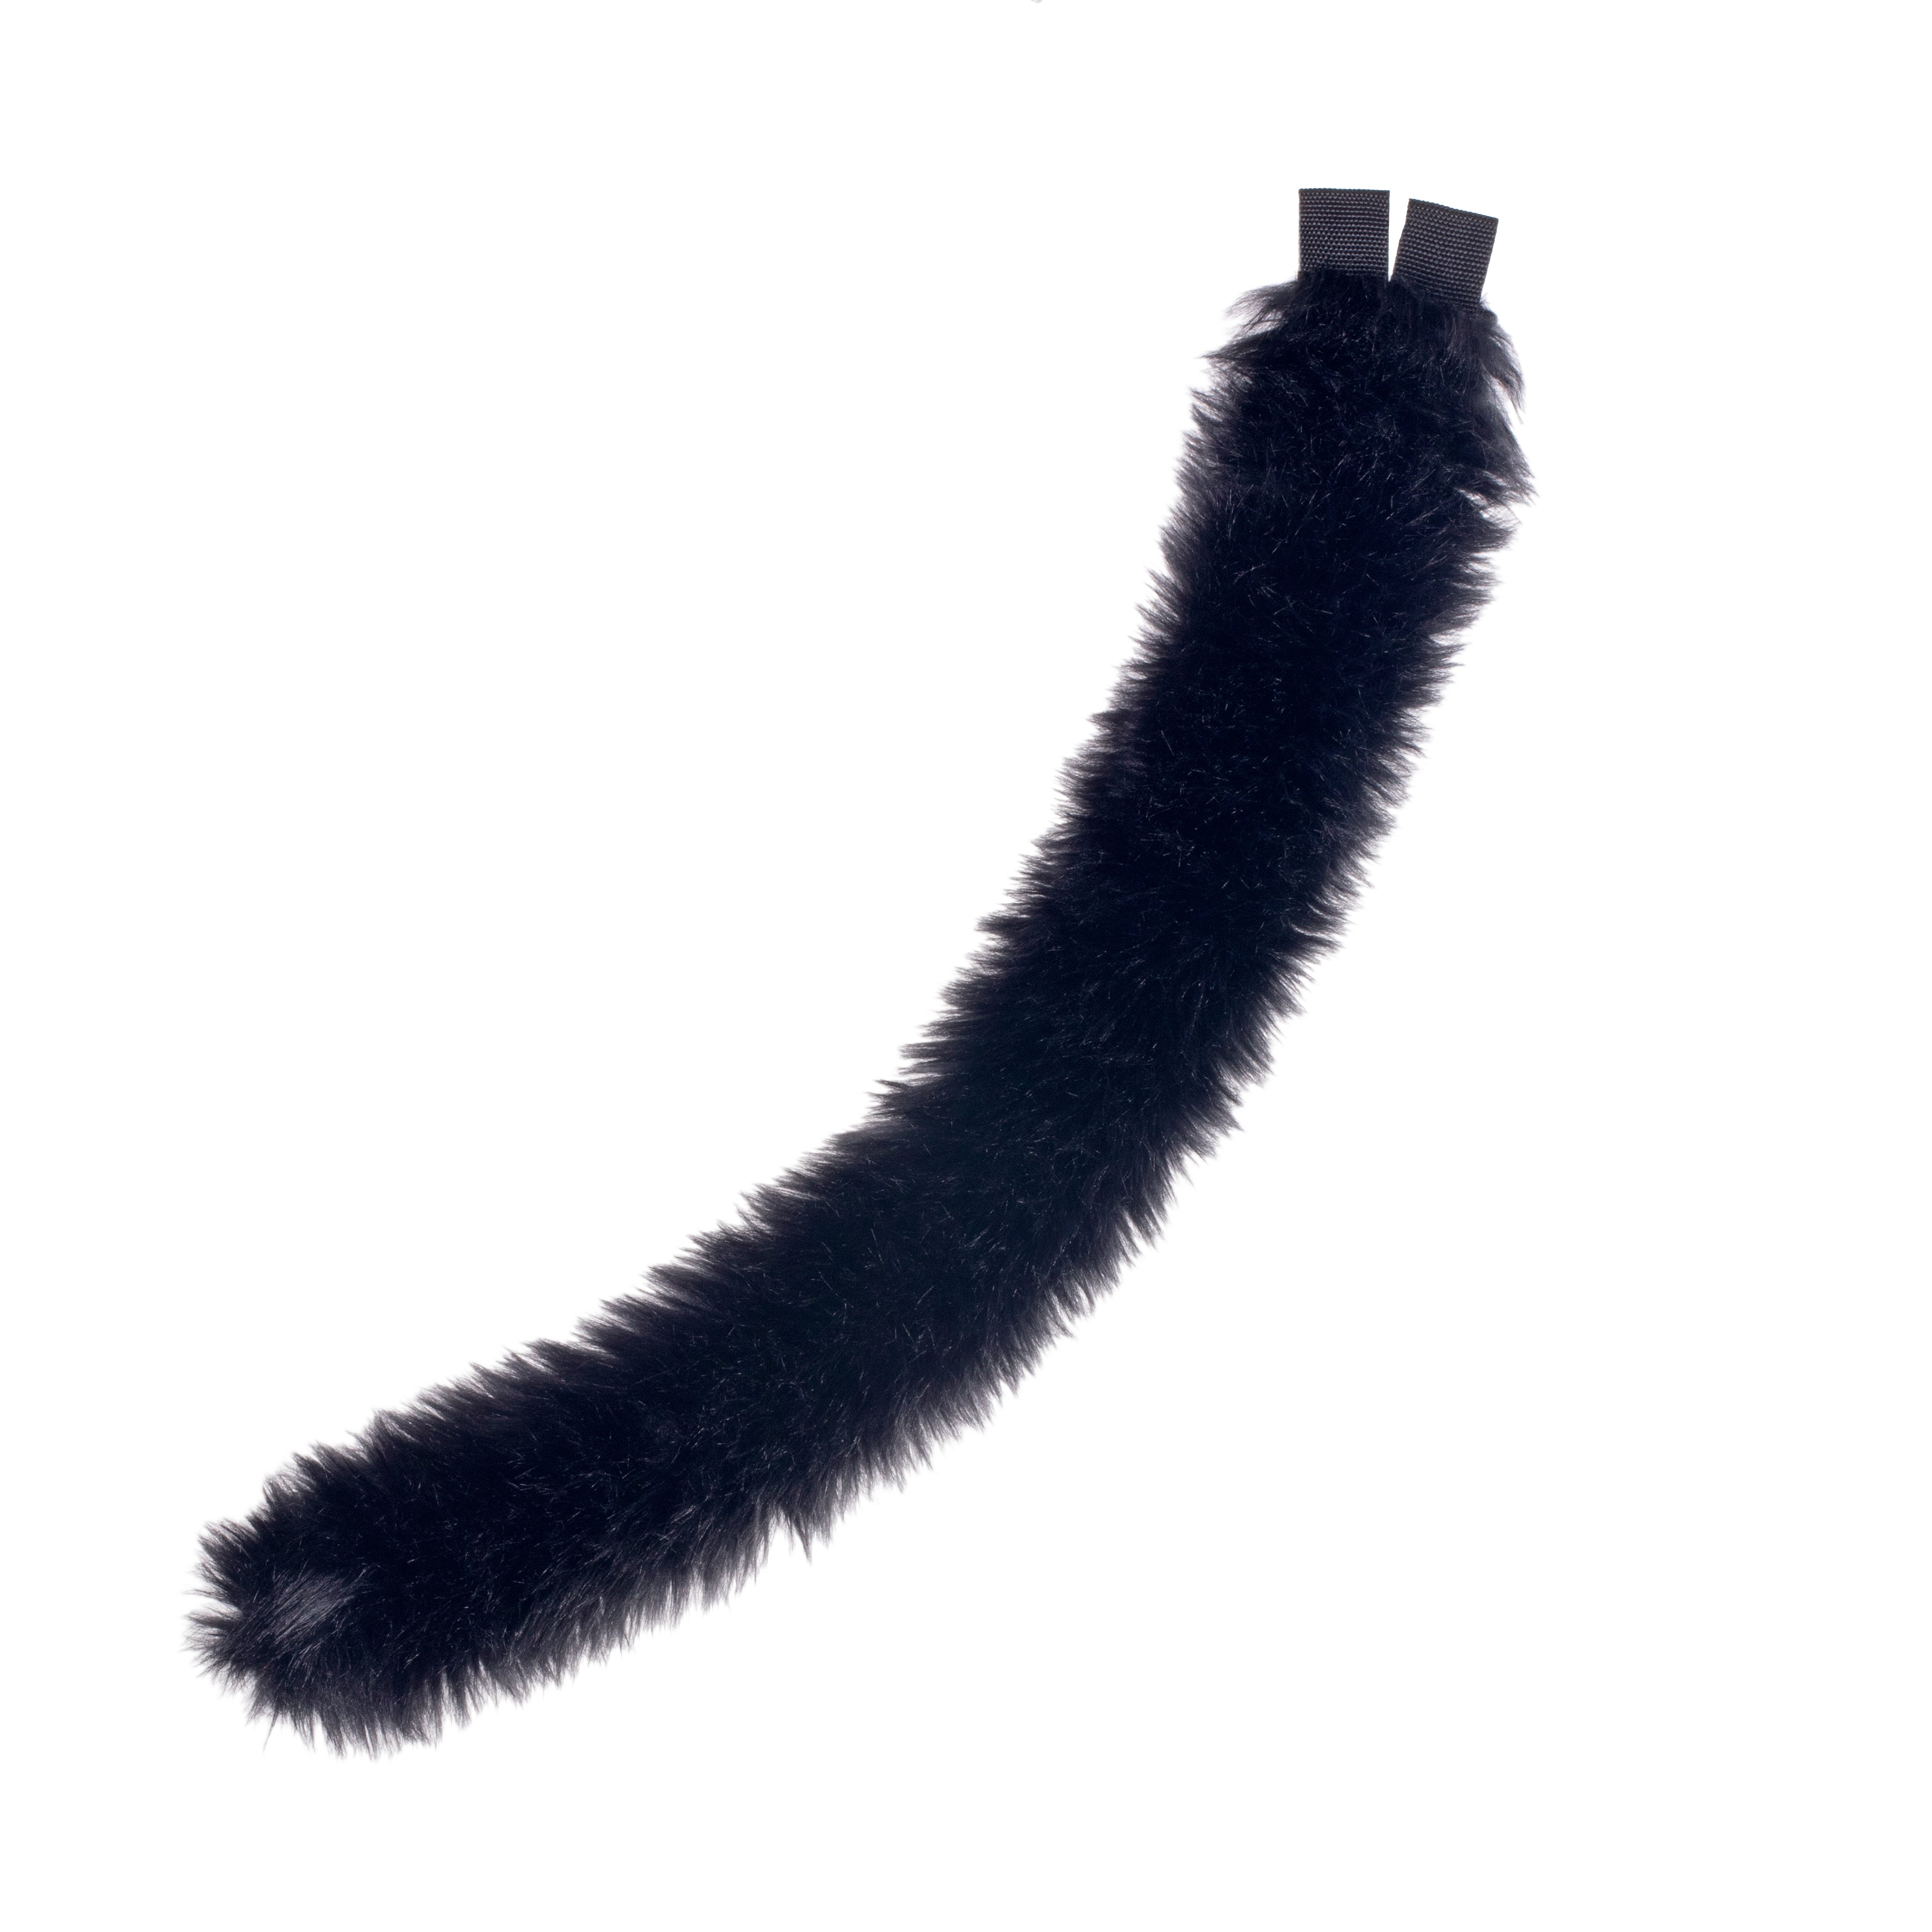 Pawstar classic original faux fur kitty cat costume tail for cosplay and partial furry fursuits. Unisex adult halloween costume.